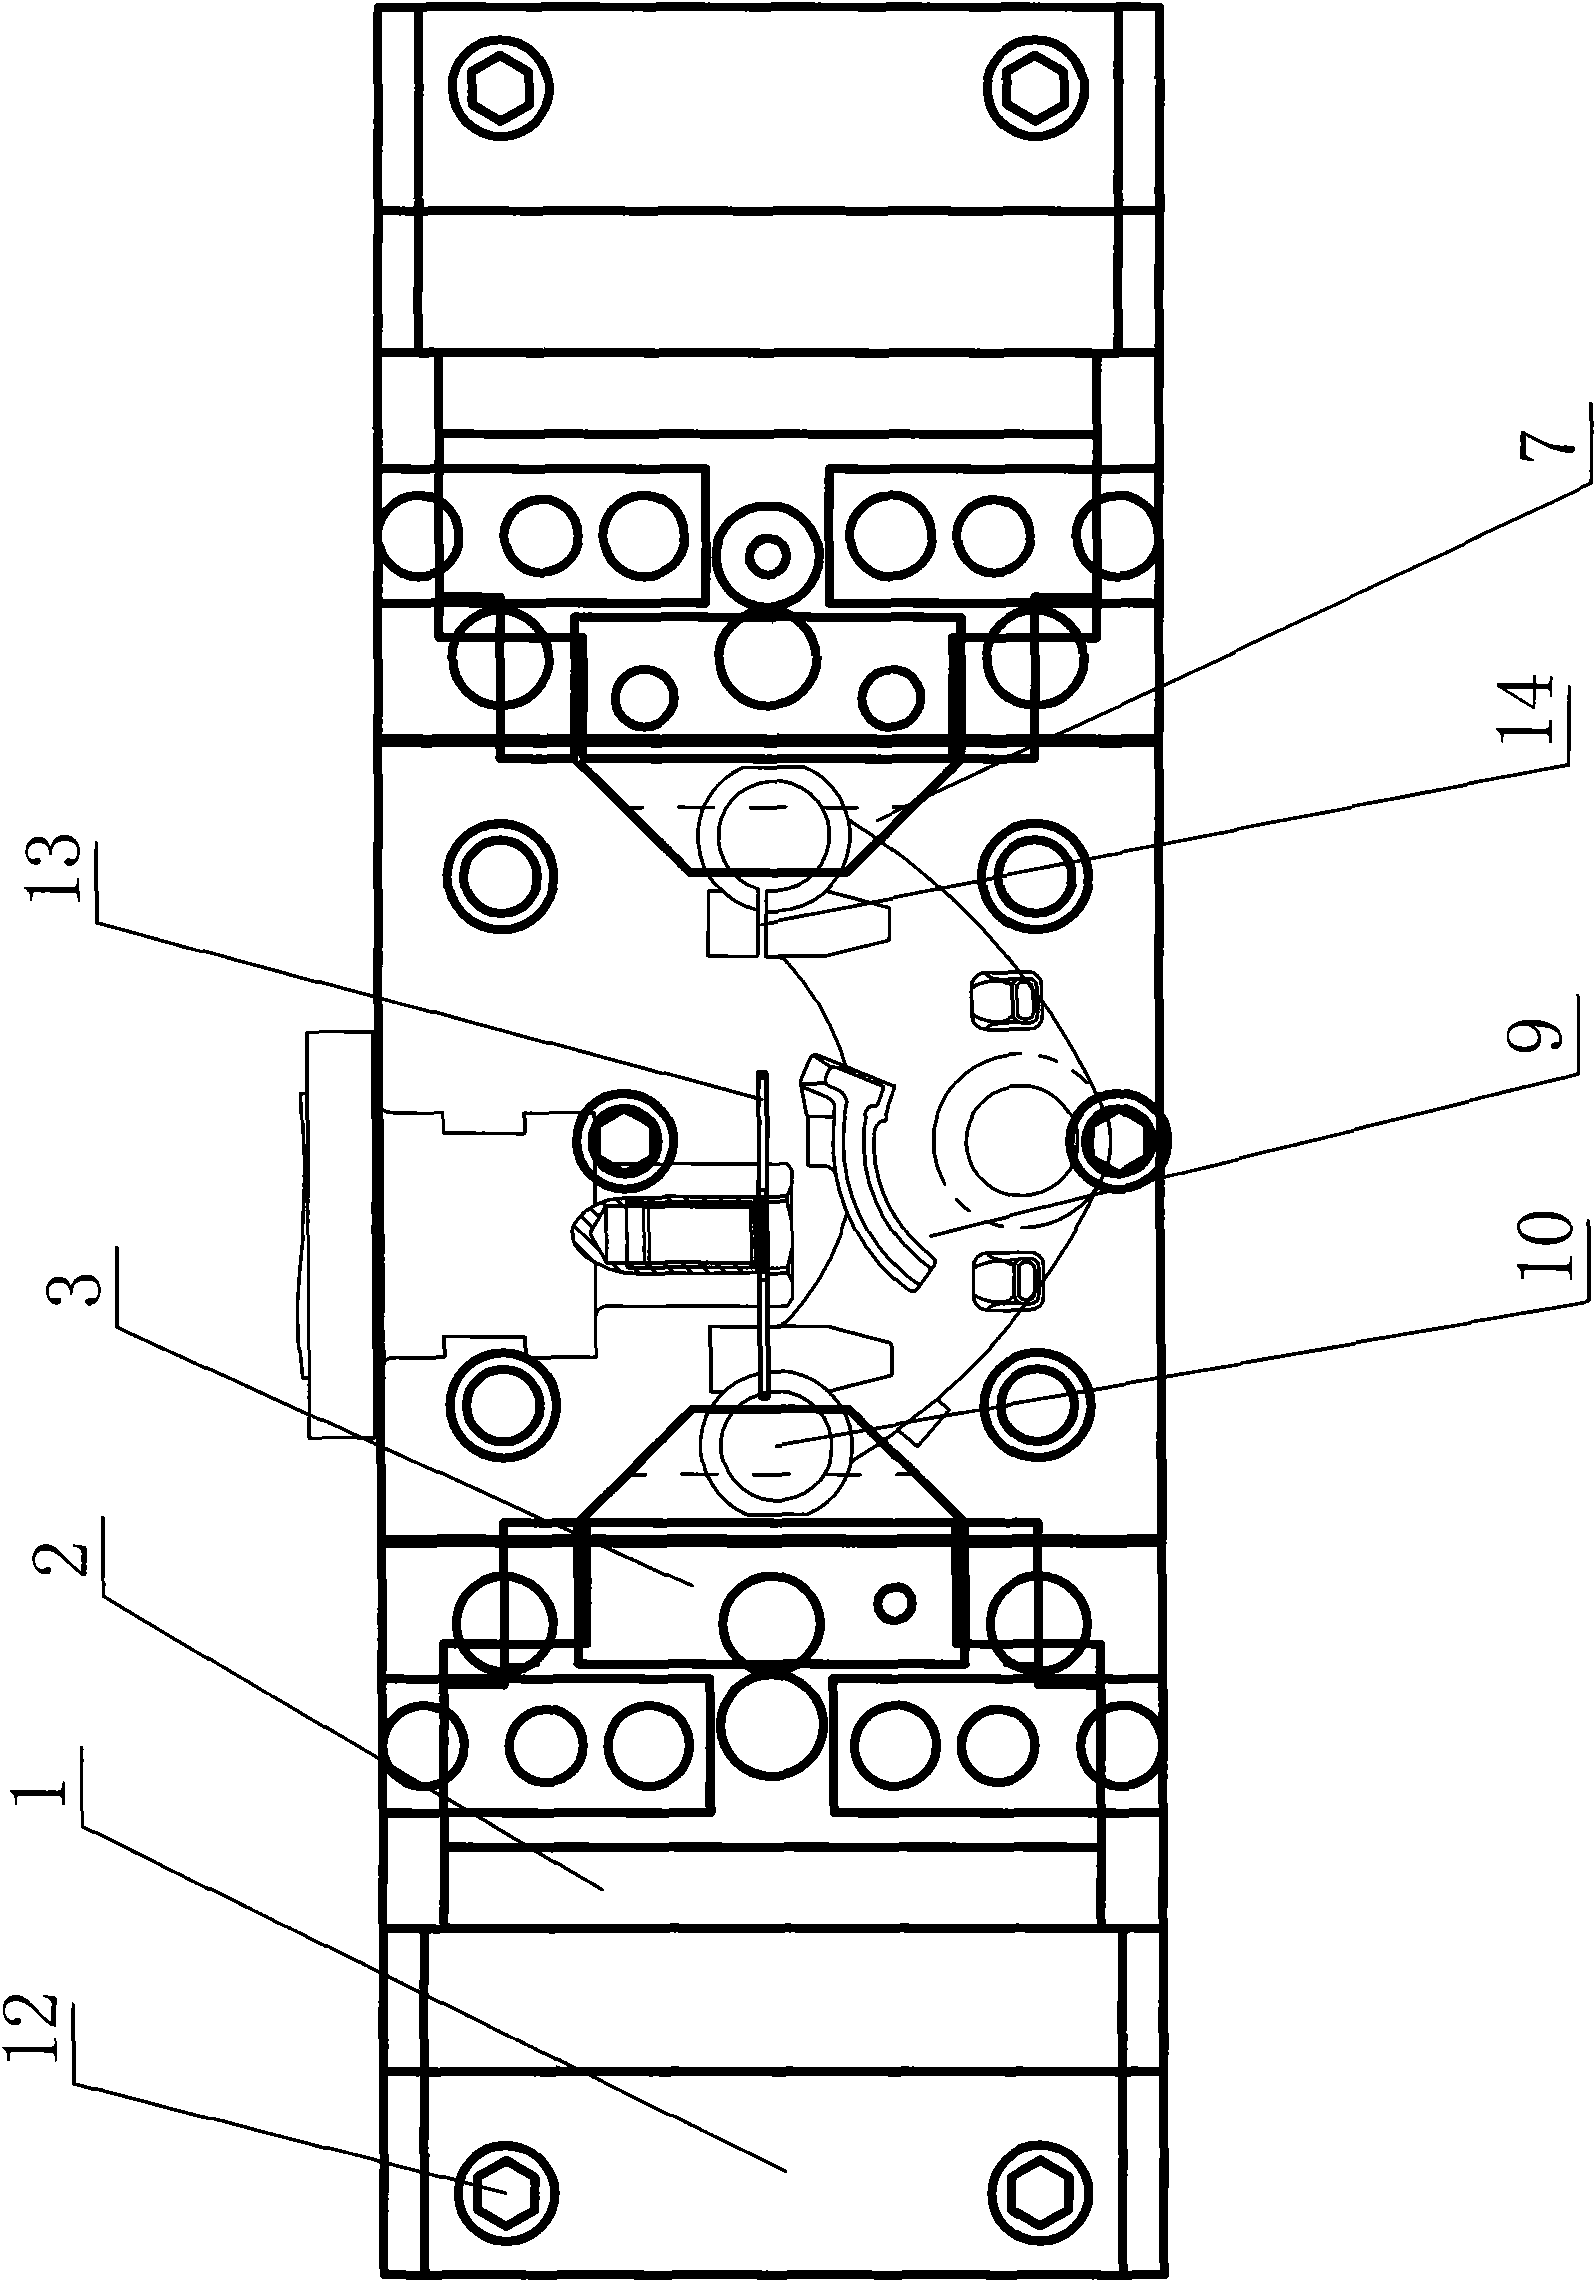 Special clamp for zero-angle opening of lower connecting plate of horizontal milling miller